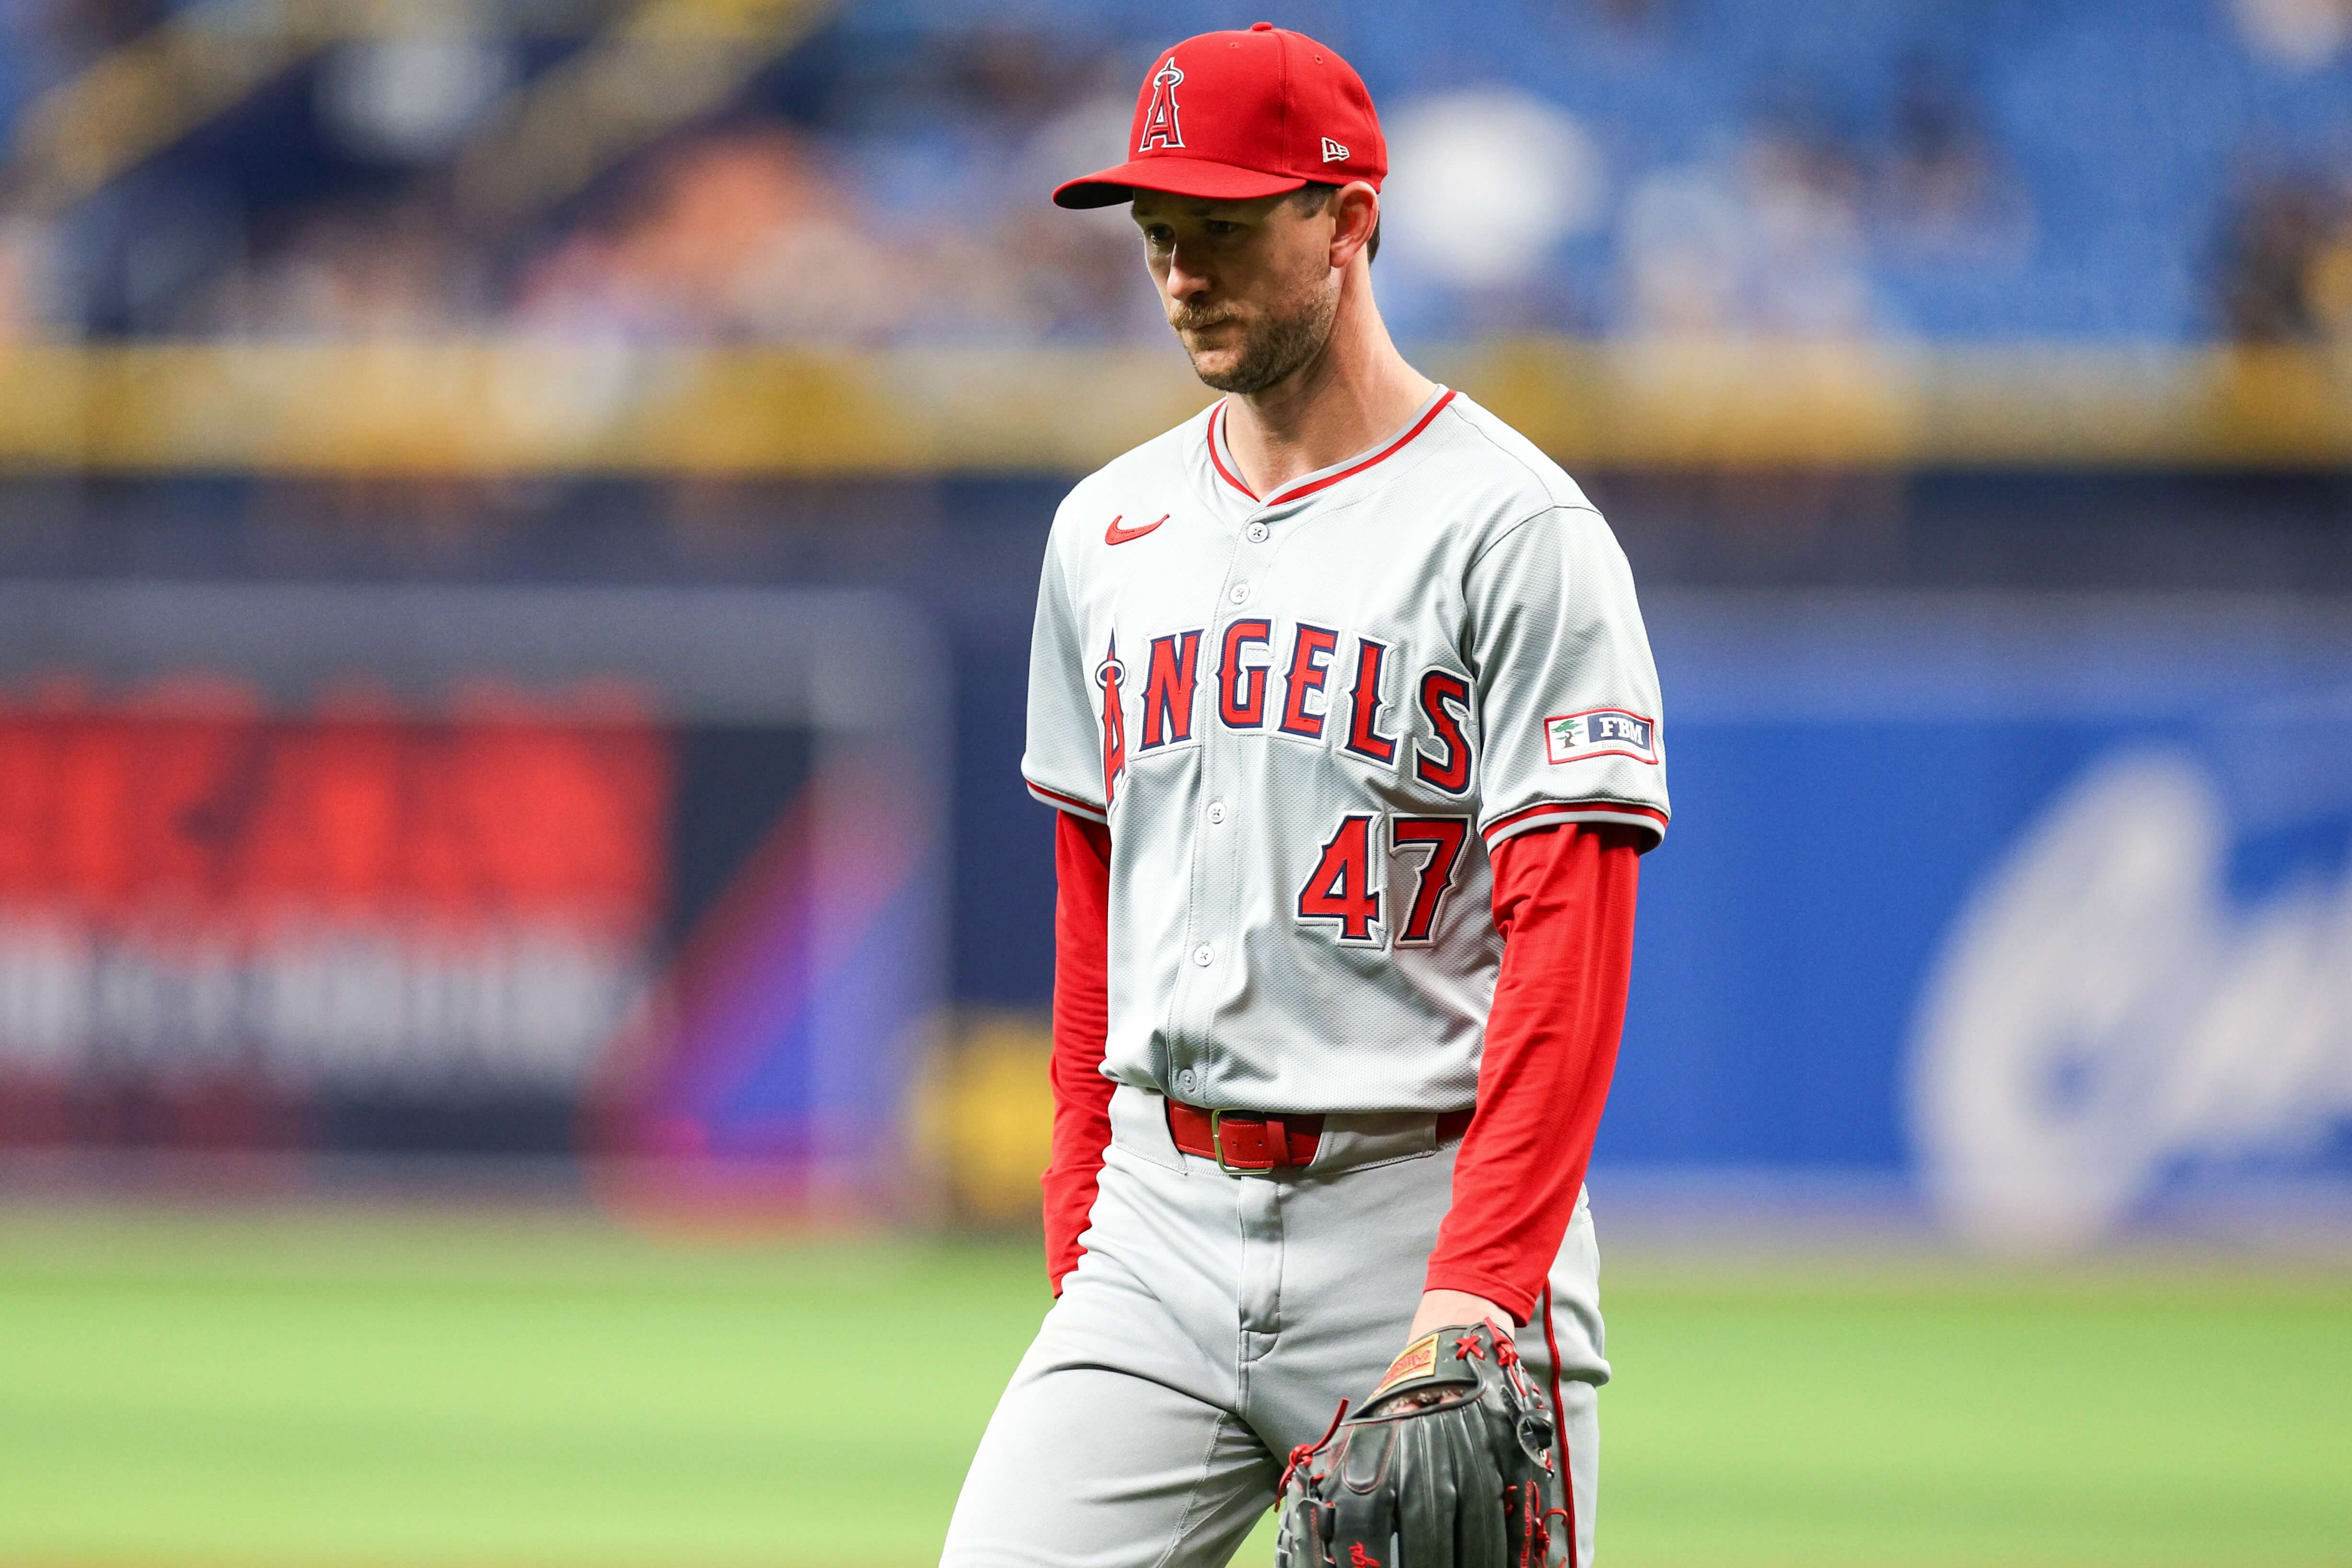 Angels vs Cubs Prediction, Picks, & Odds for Today's MLB Game